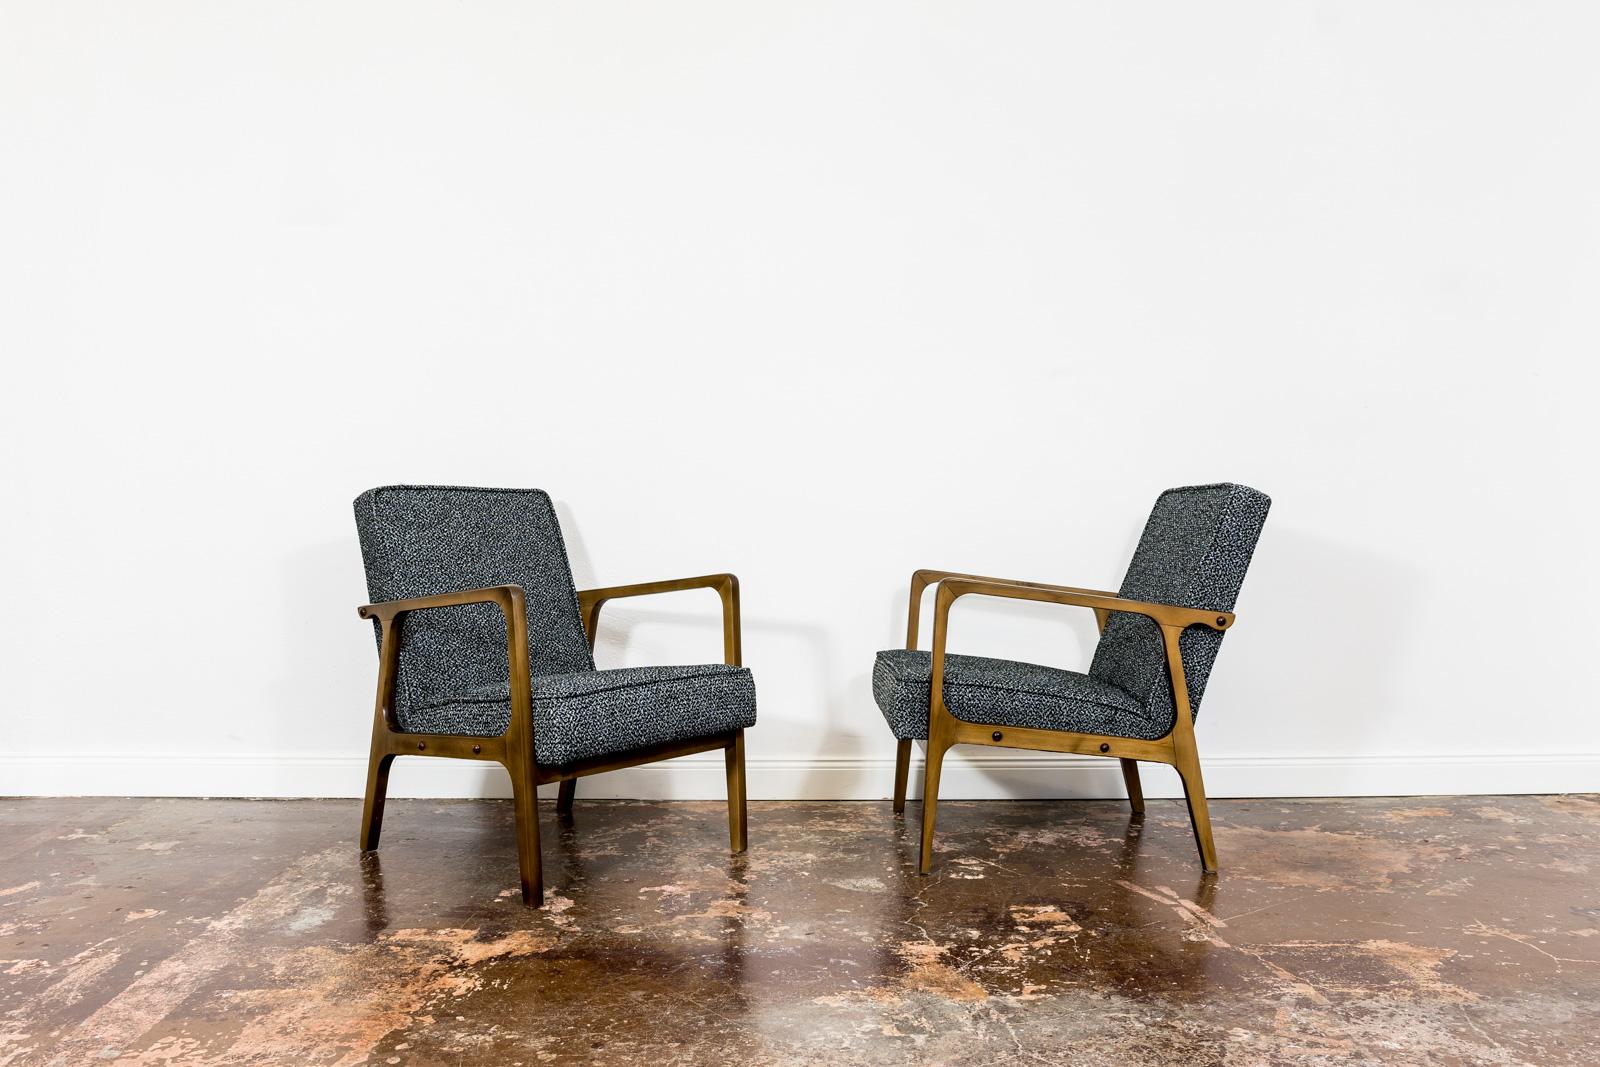 Polish Pair Of Mid Century Armchairs Type 04-B From Bydgoskie Fabryki Mebli, 1960's For Sale